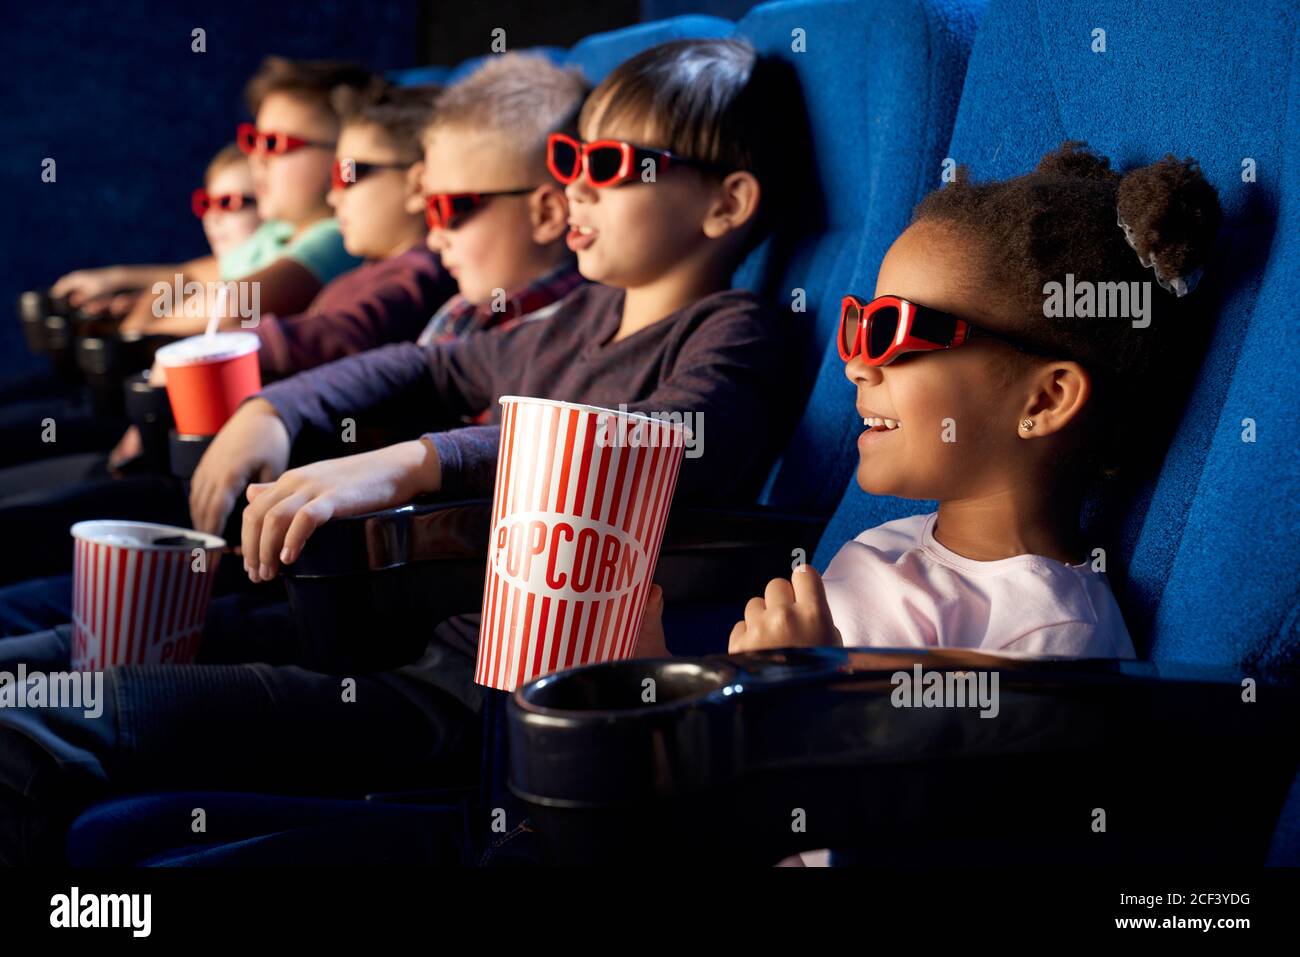 Happy african female child wearing 3d glasses, holding popcorn and watching comical movie. Cute little girl spending free time with friends in cinema and laughing. Concept of leisure, entertainment. Stock Photo